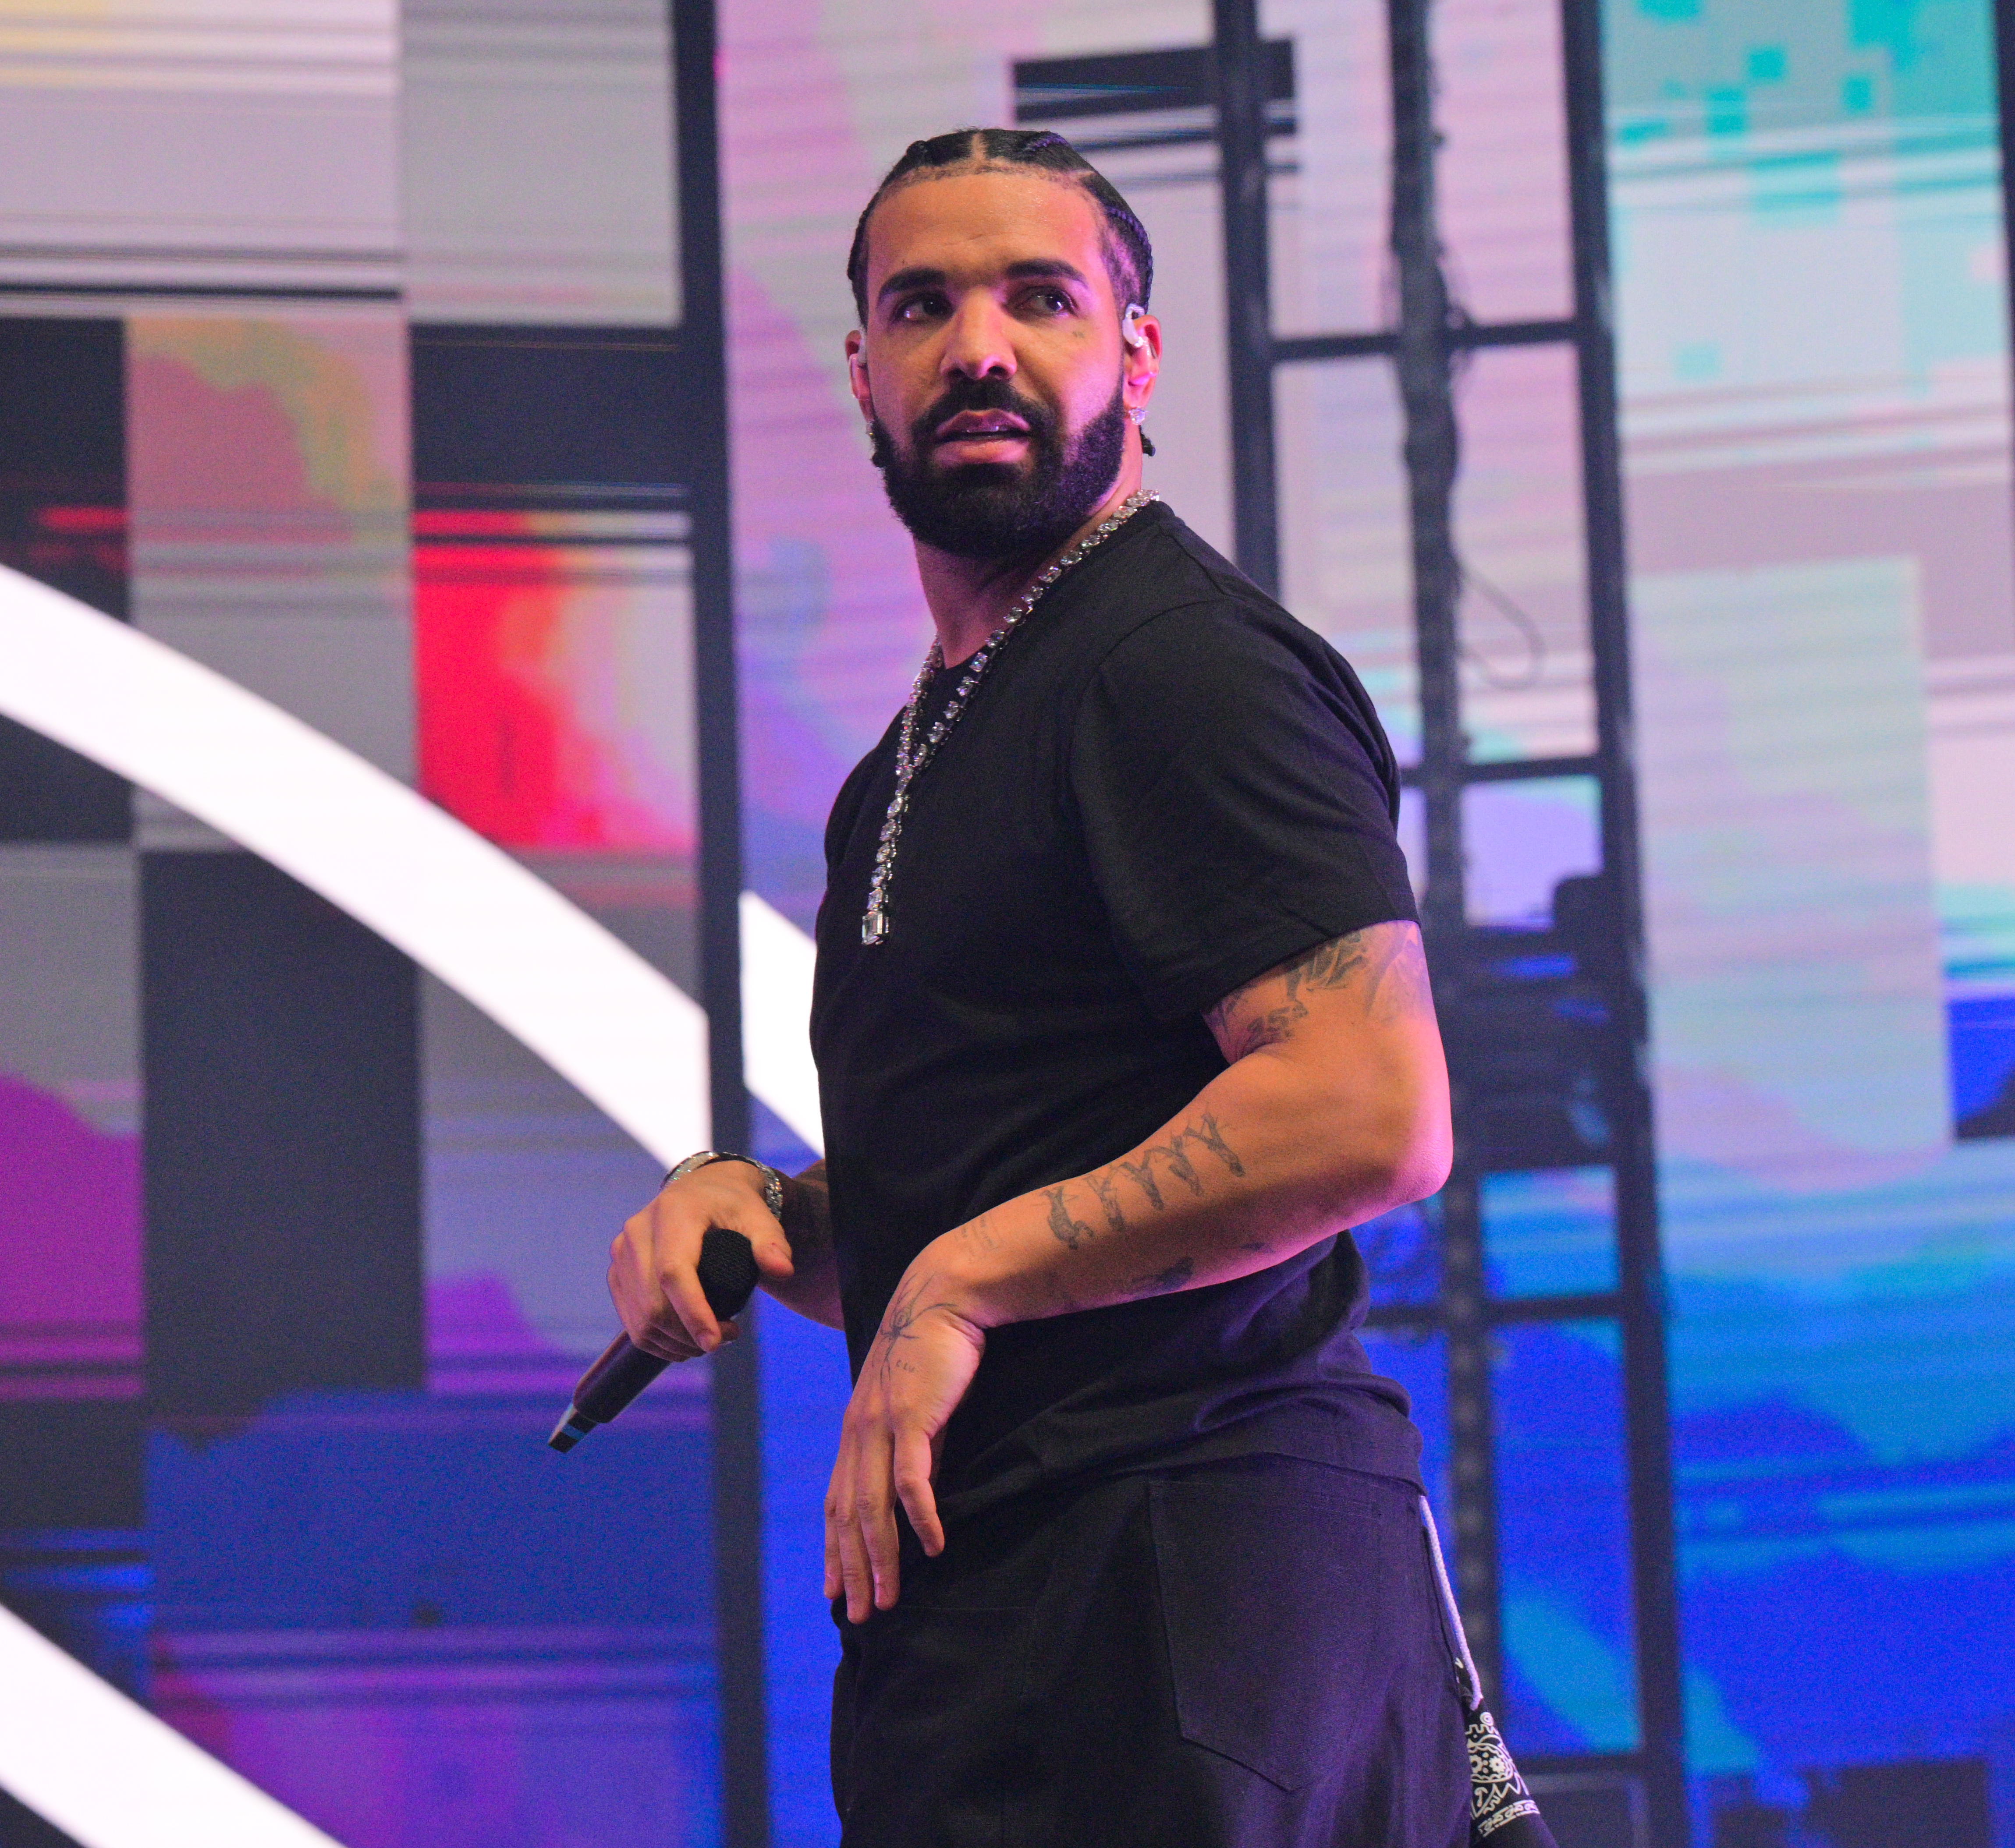 In his Push Ups response, Drake mocked K-Dot for being featured in pop songs, the rapper's stature, as well as Kendrick's place in the industry